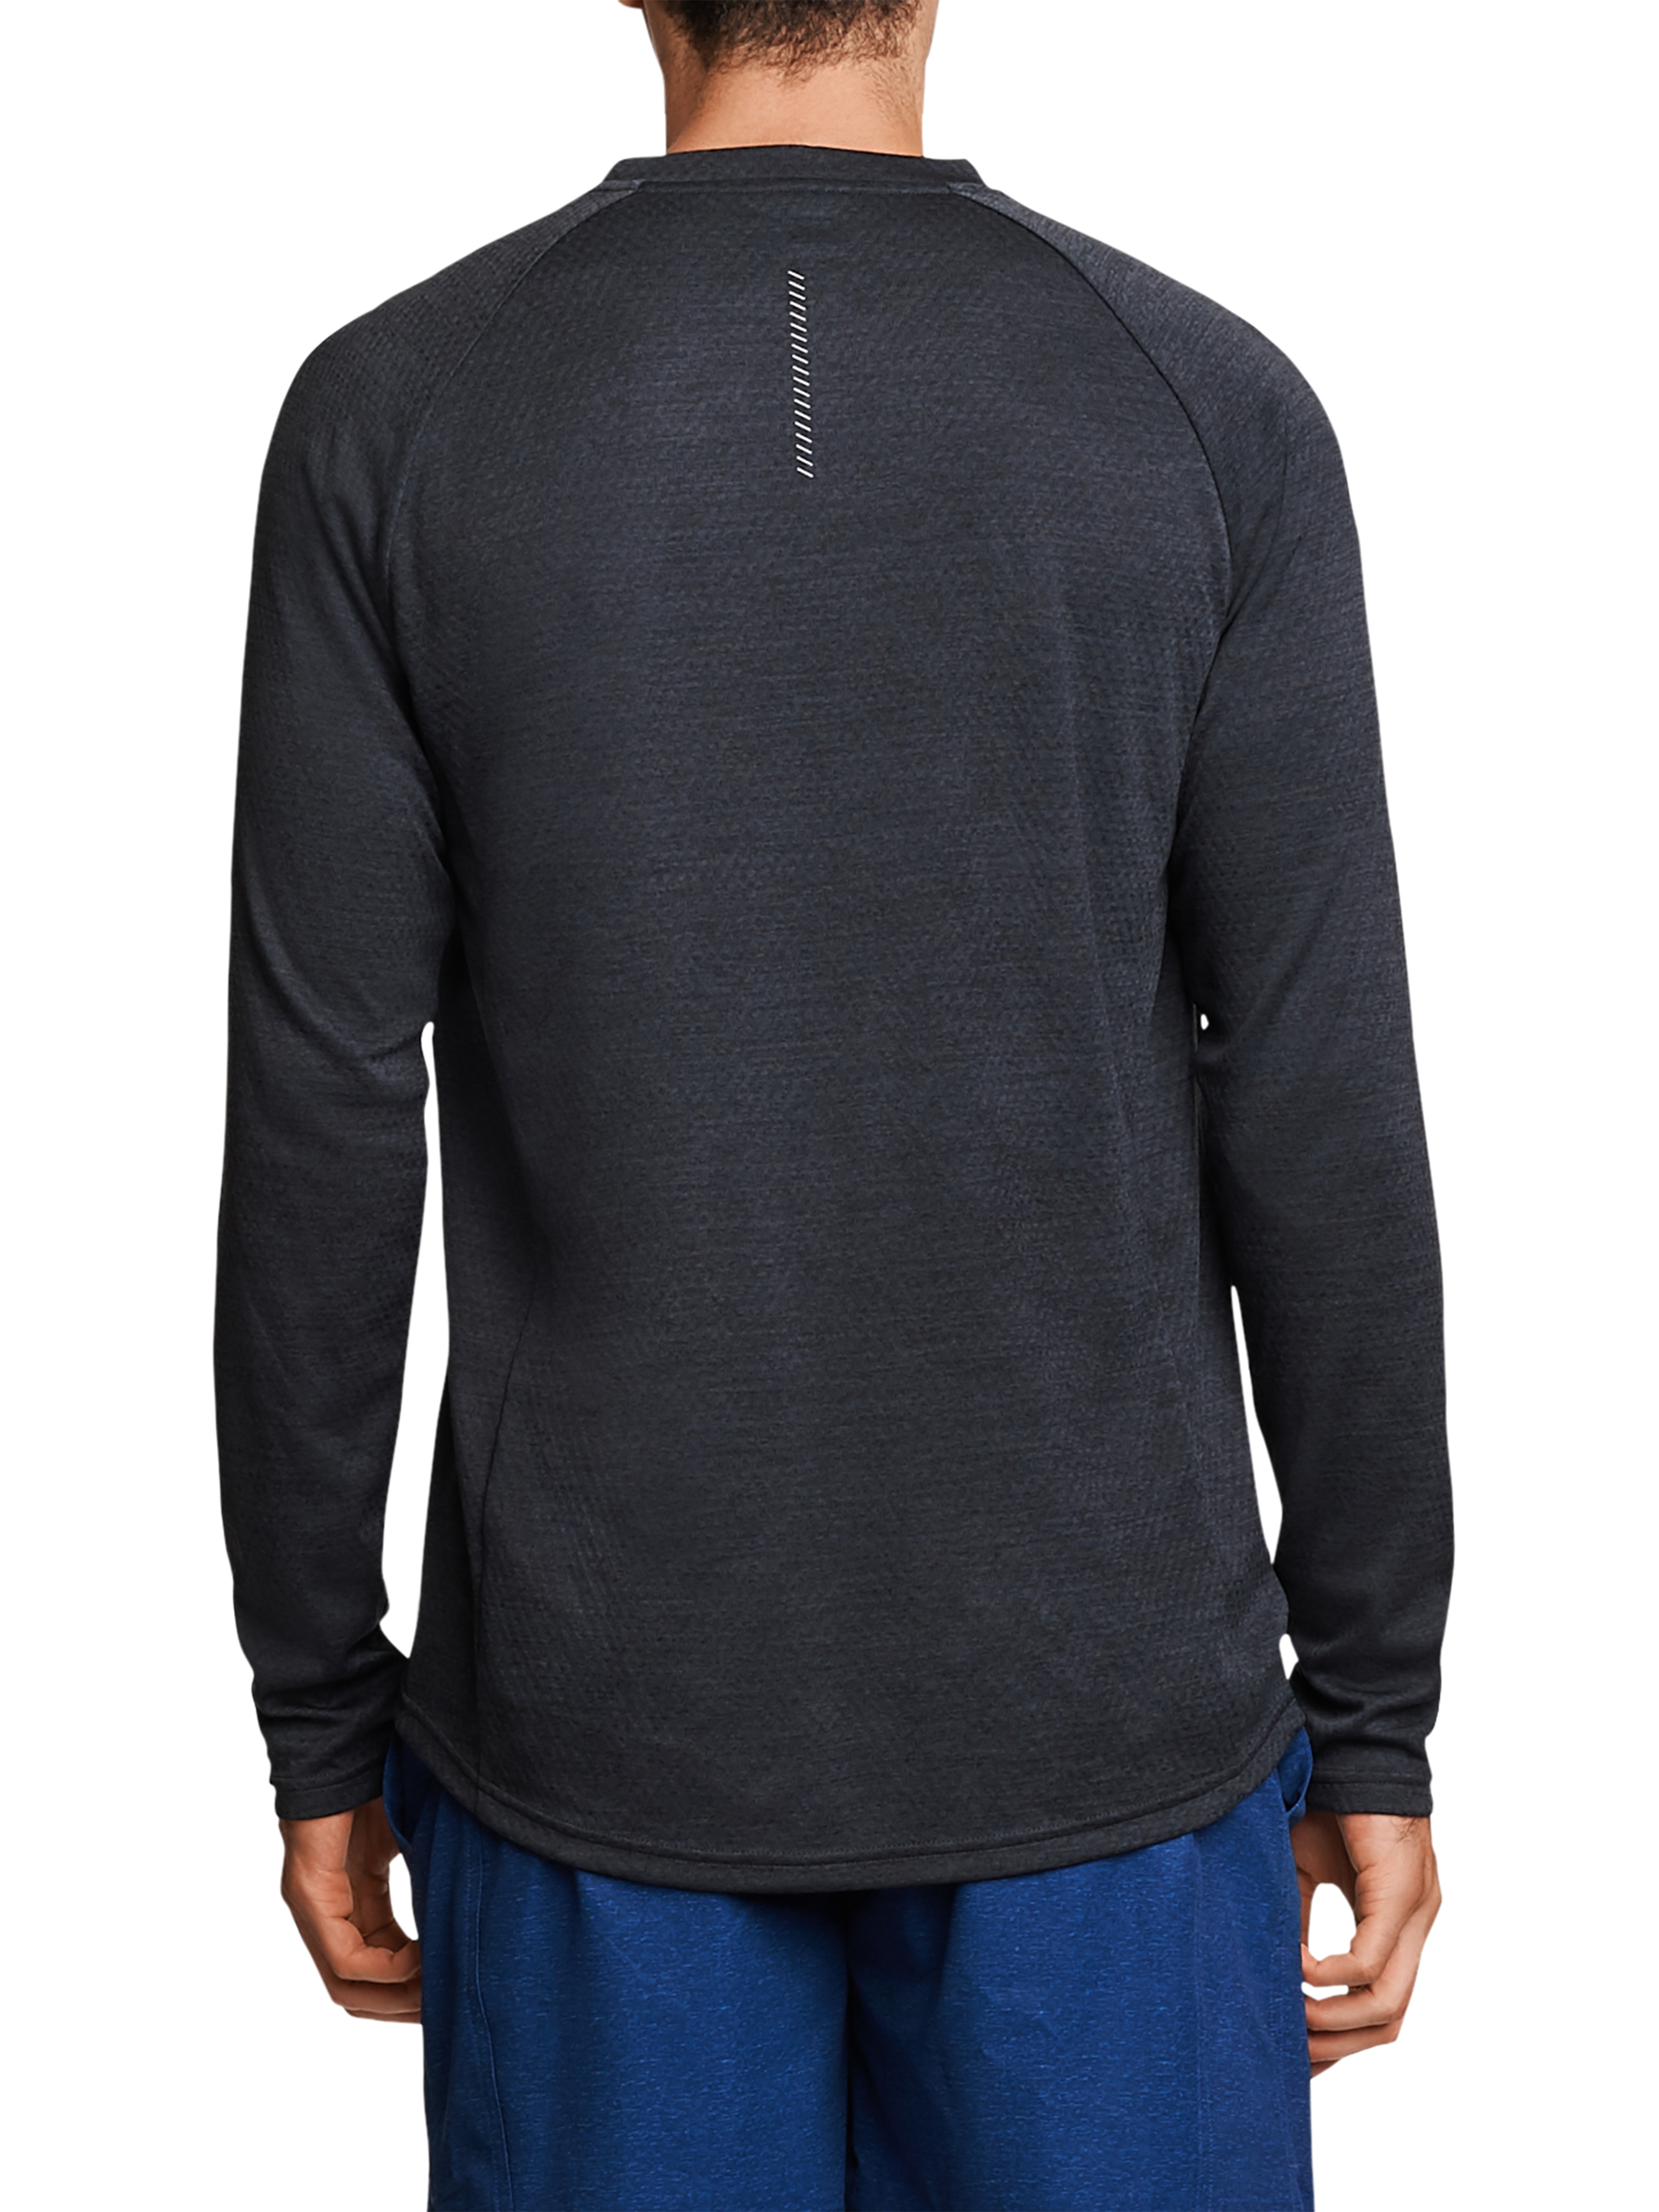 Russell Men's and Big Men's Long Sleeve Performance Tee, up to Size 5XL - image 5 of 7